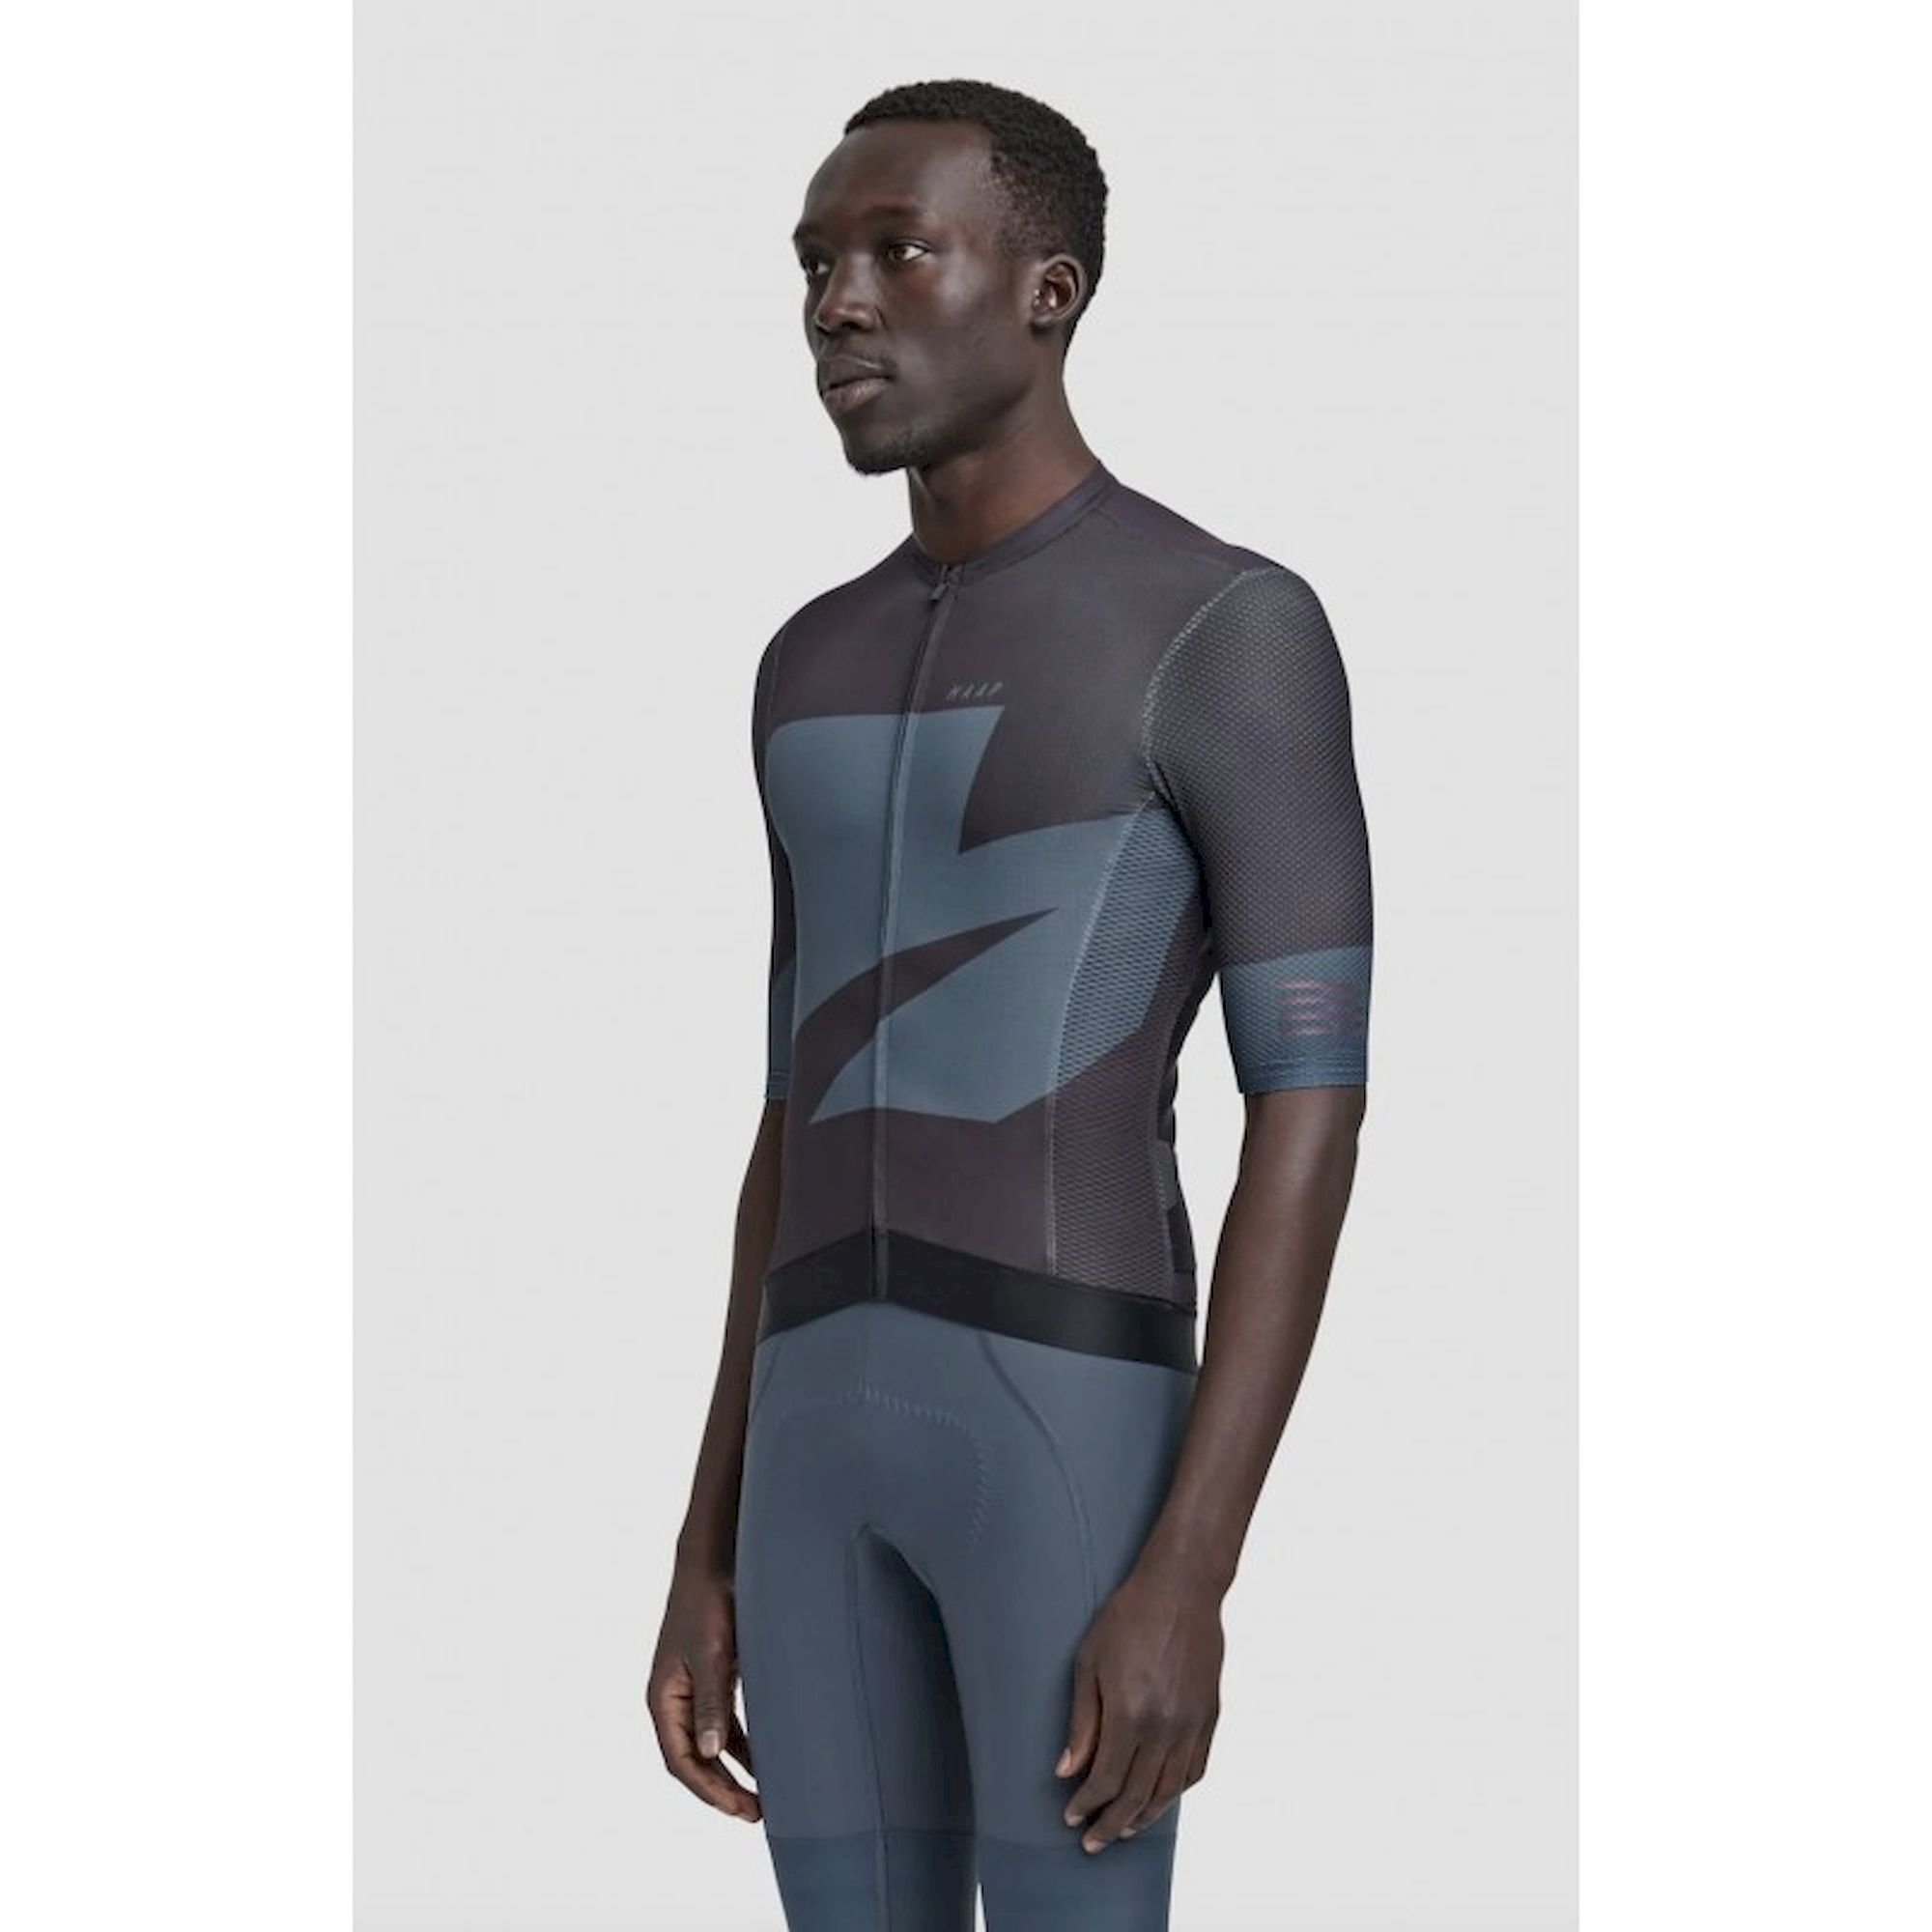 Maap Evolve Pro Air Jersey - Maillot vélo homme | Hardloop